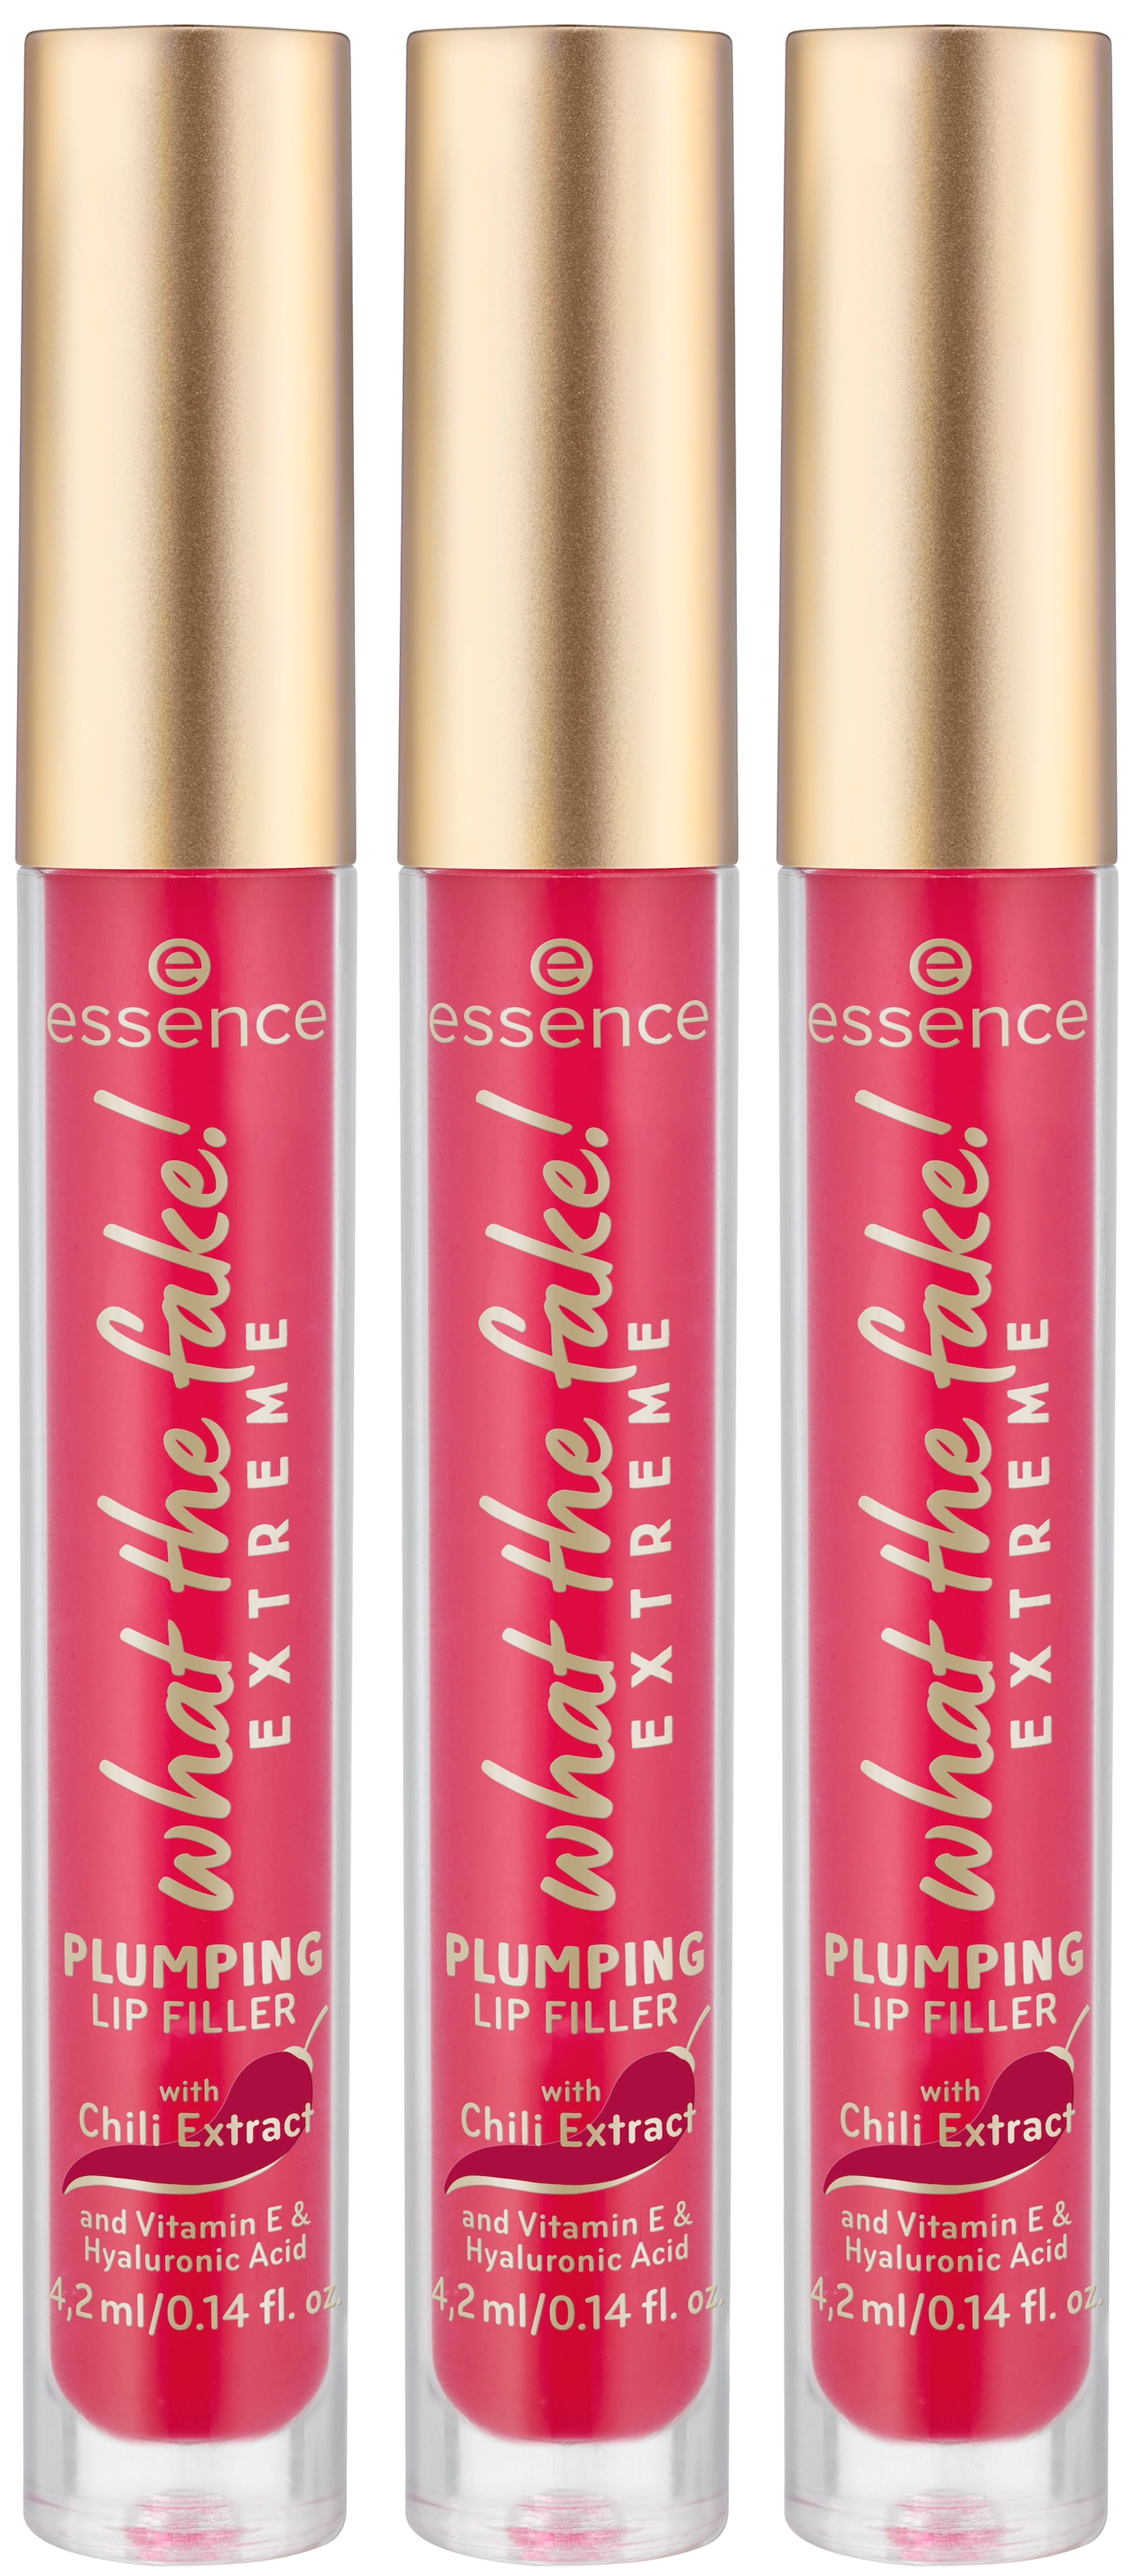 Lip-Booster tlg.) 3 bei the fake! LIP FILLER«, EXTREME (Set, Essence OTTO »what PLUMPING